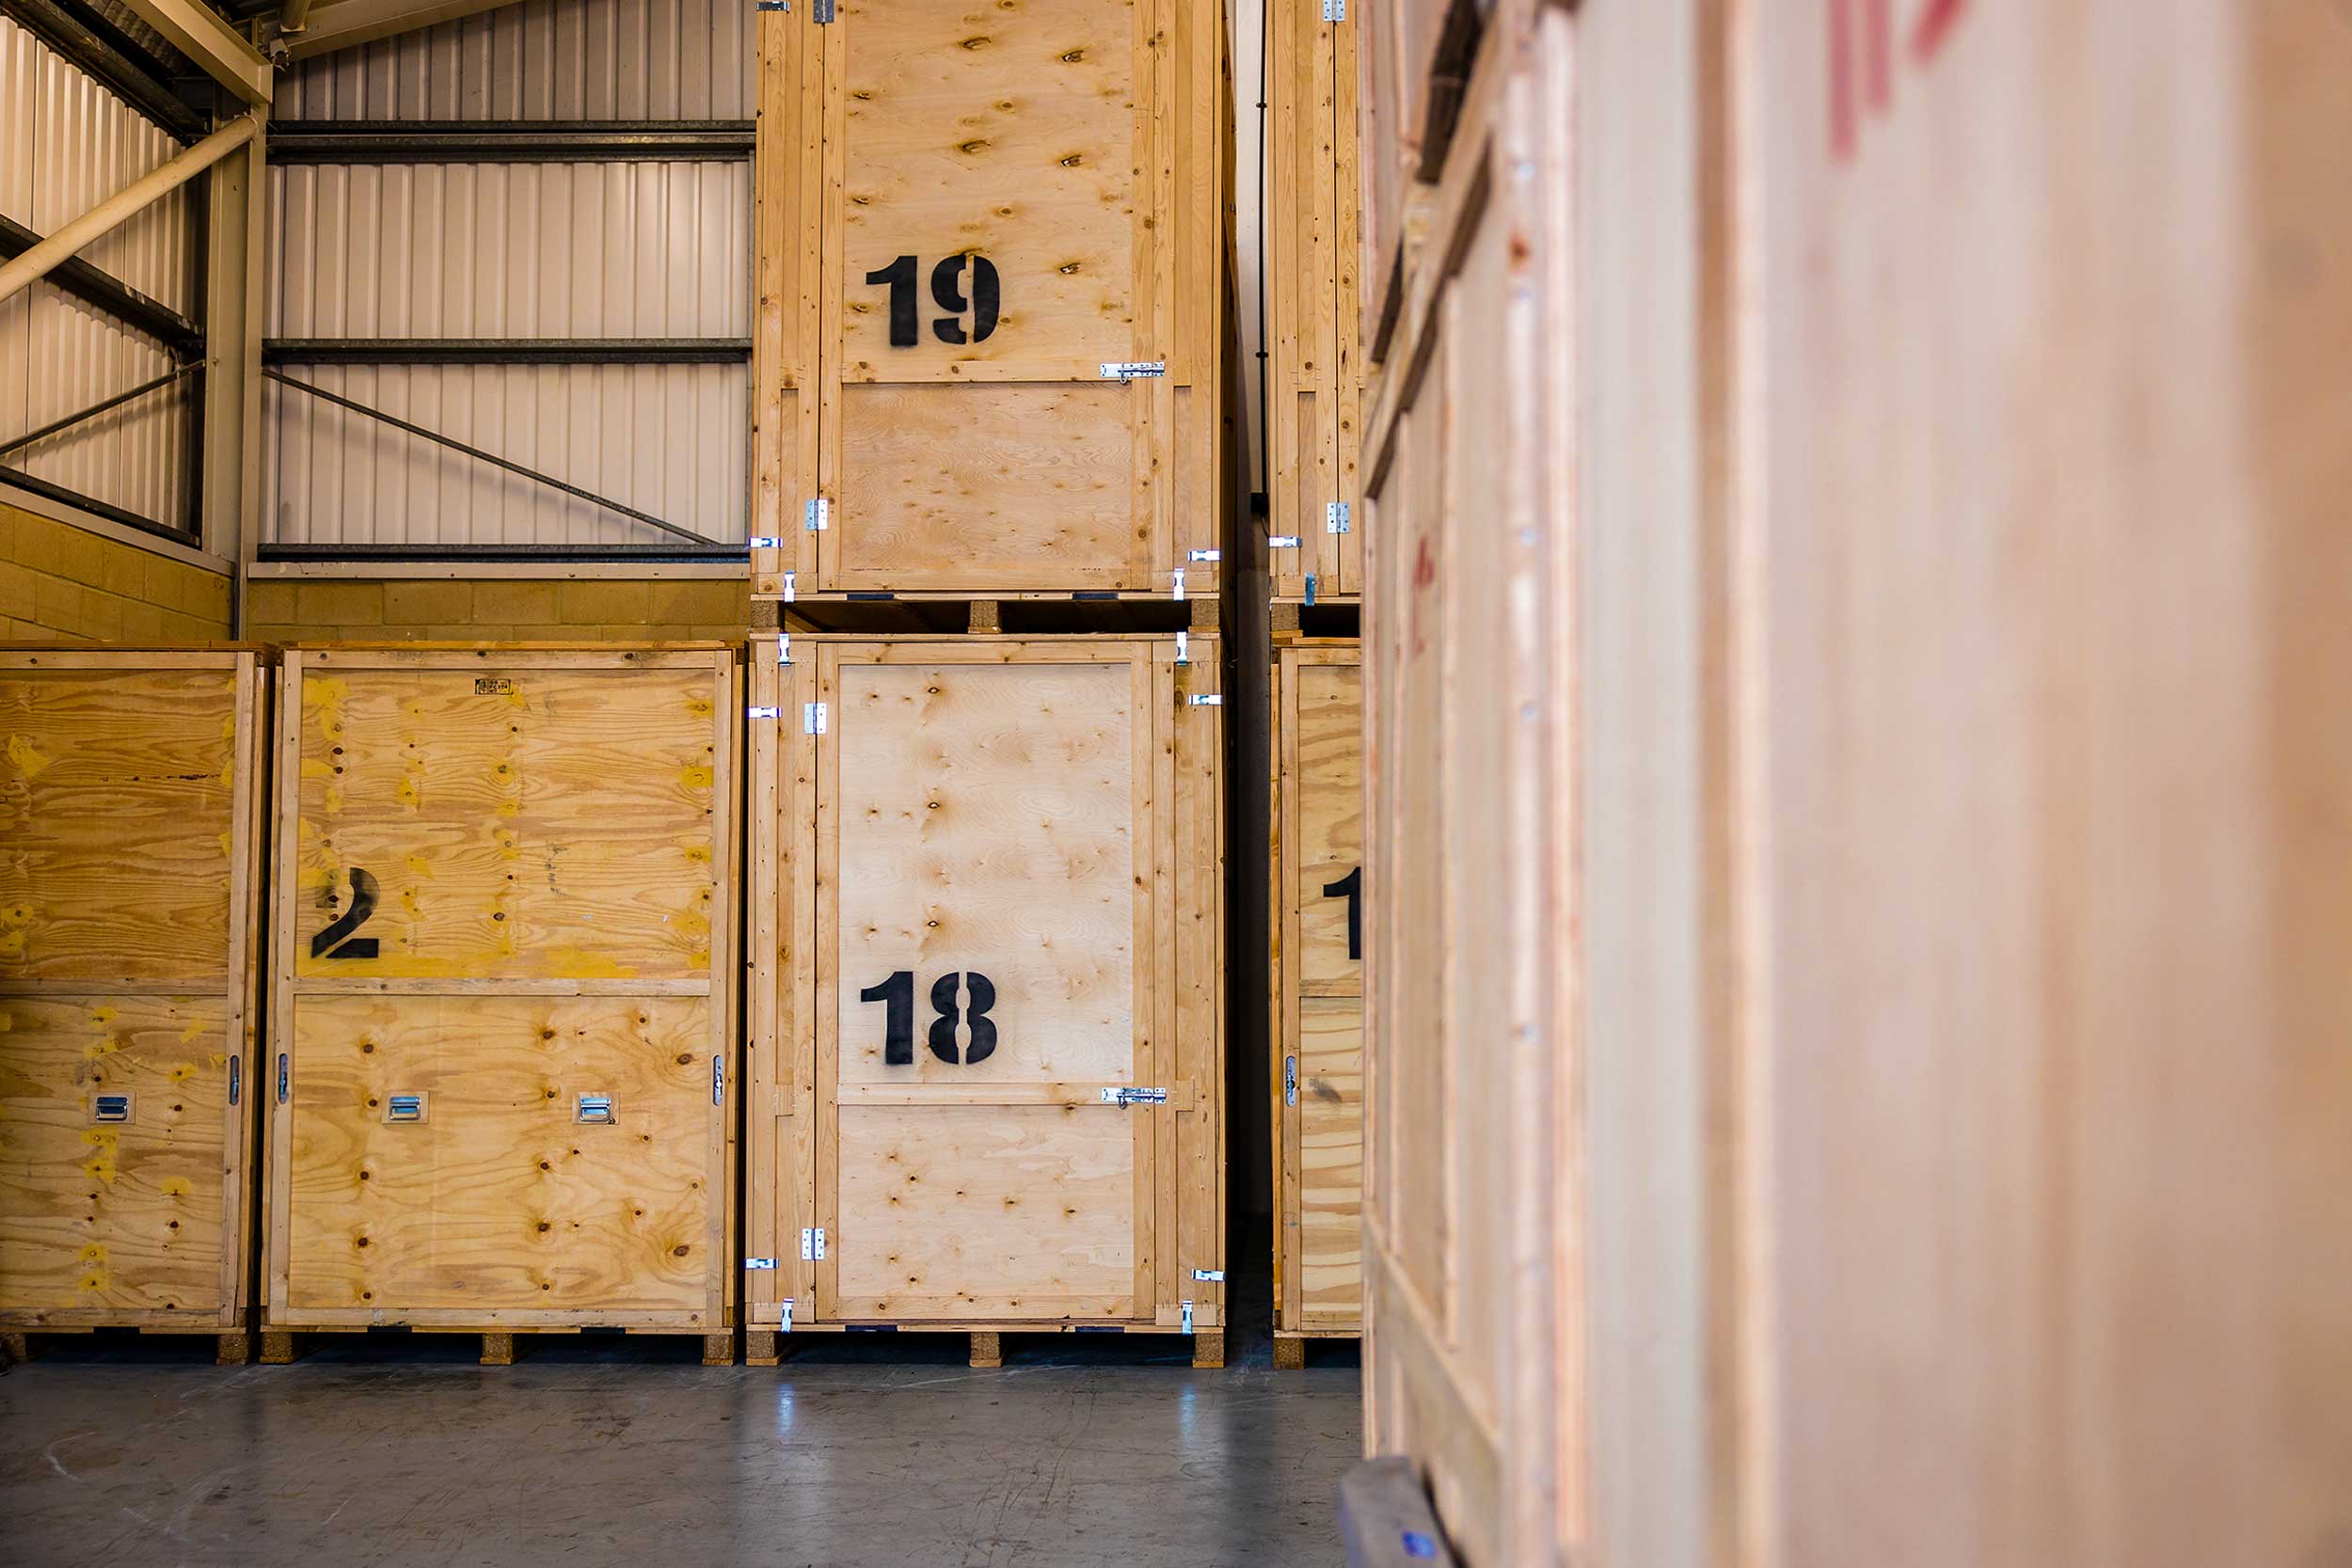 Rows of storage boxes in a spacious warehouse with numbering system on the front.